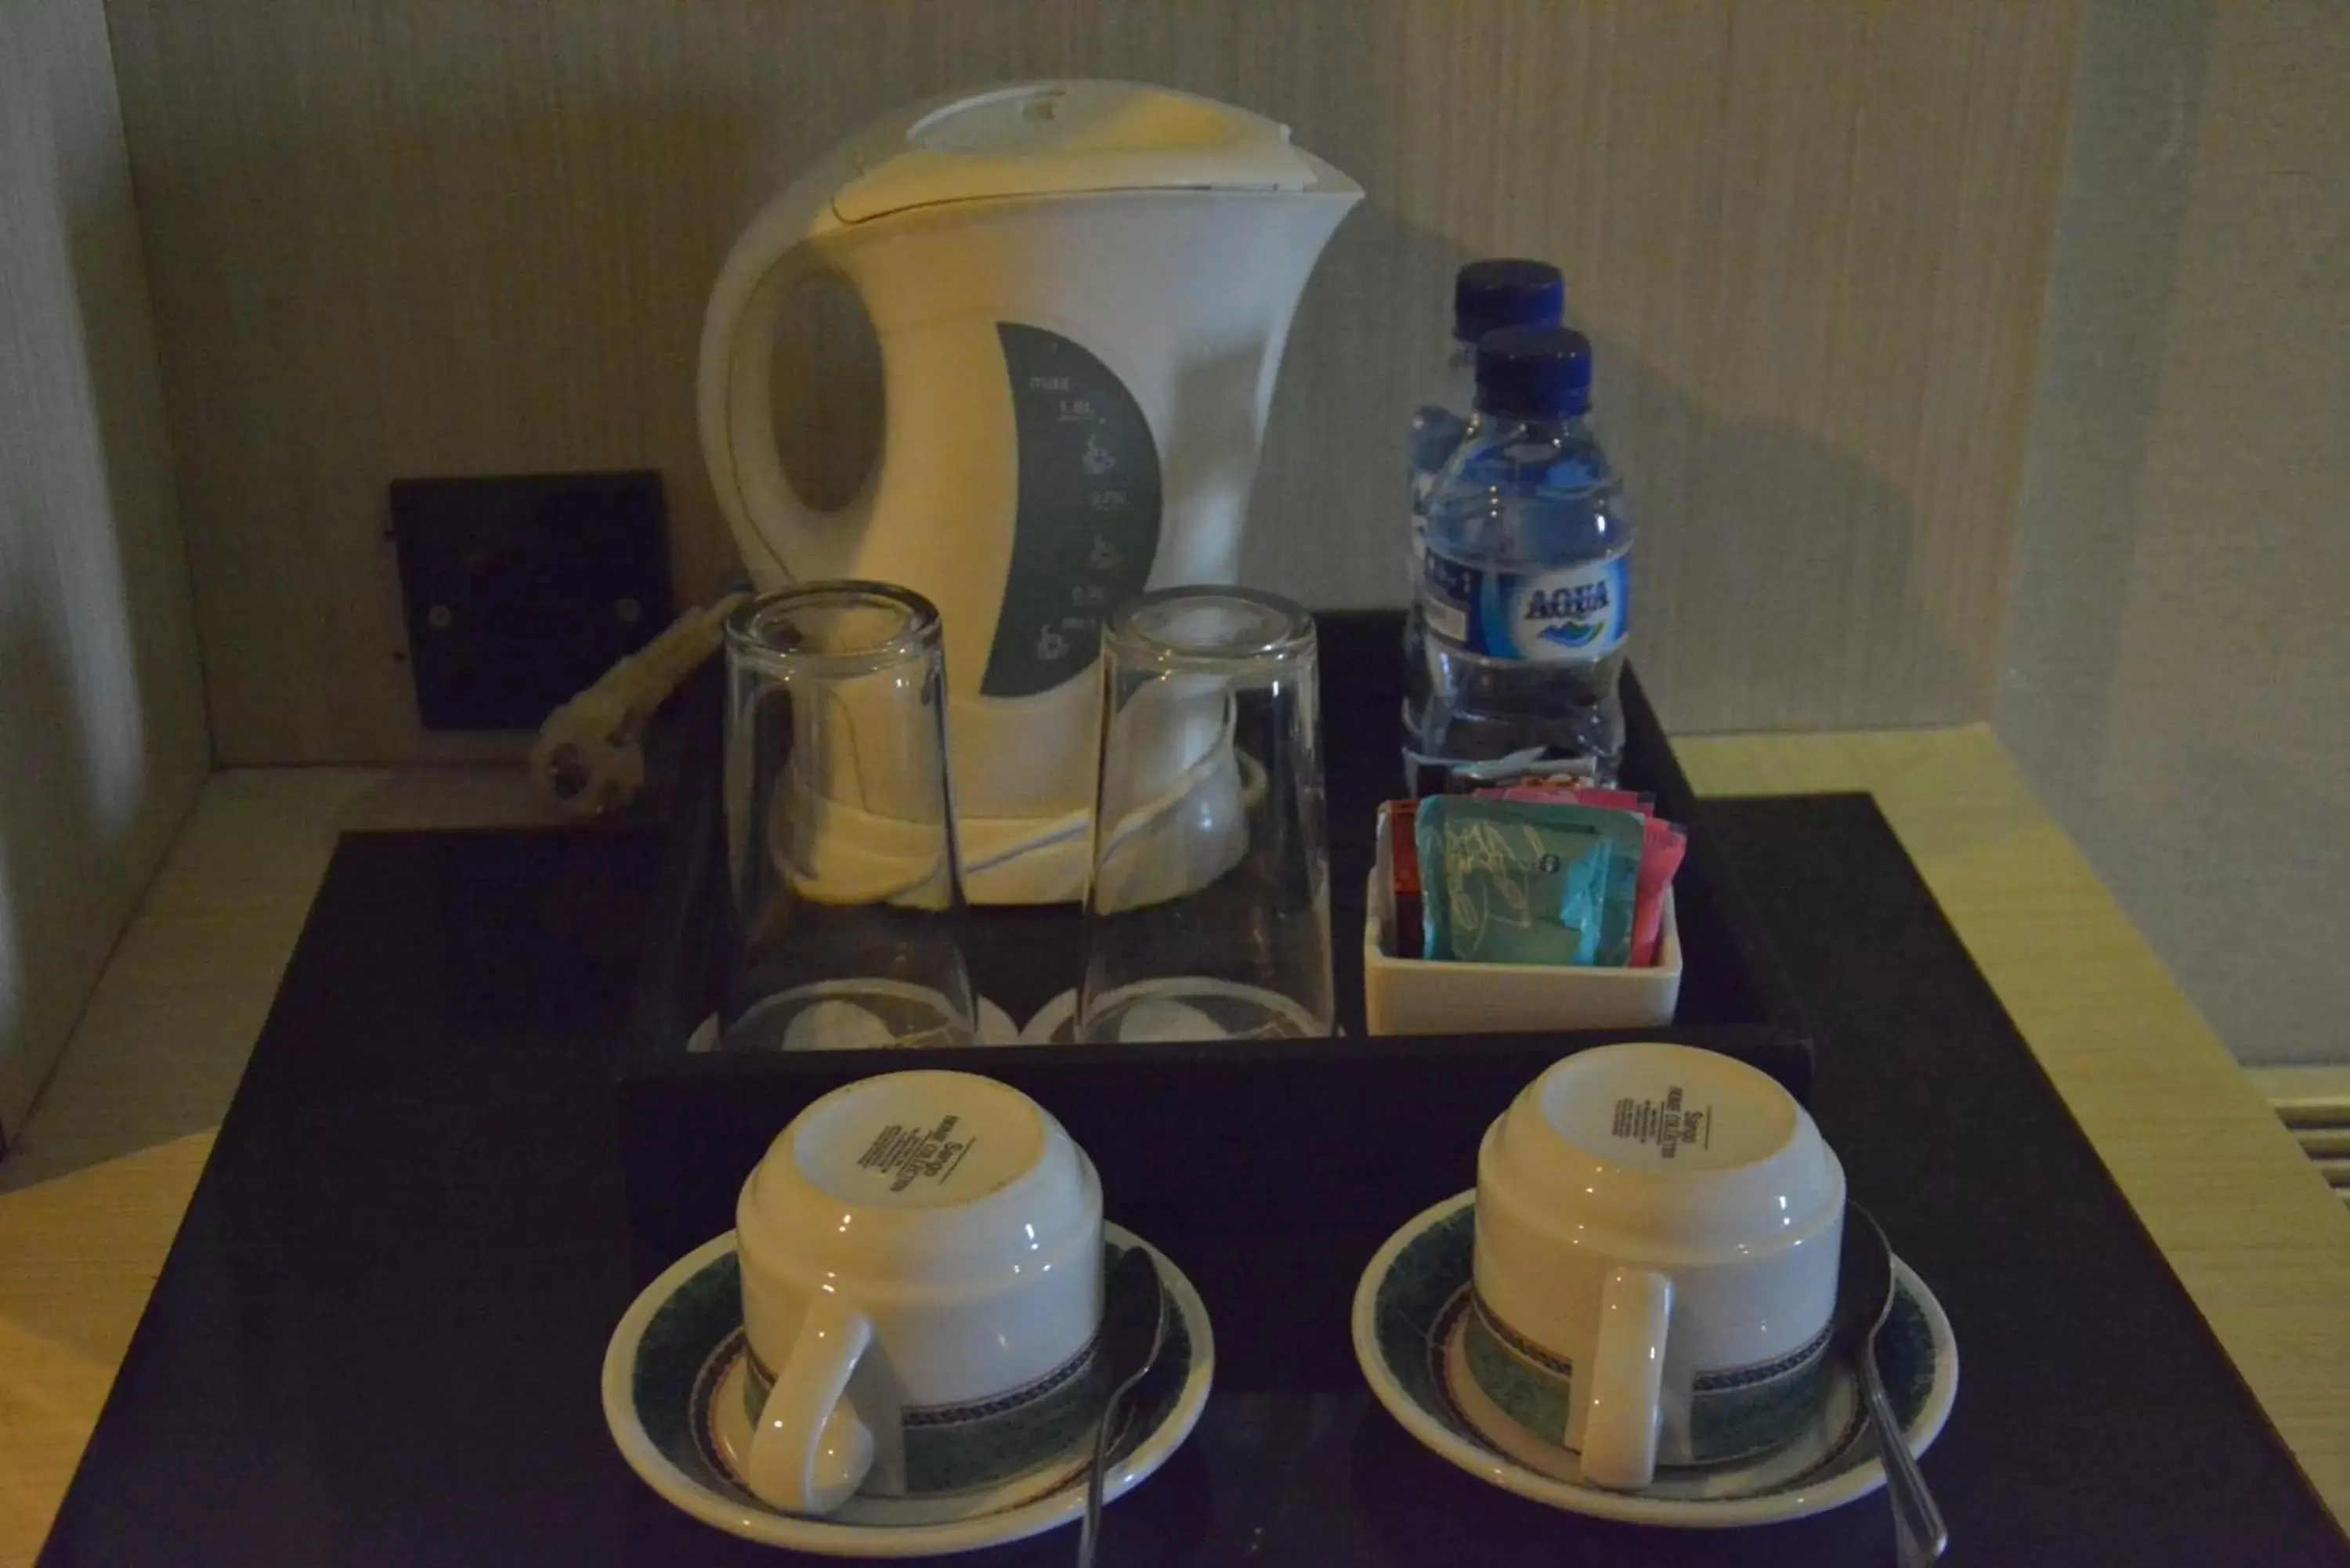 Coffee/Tea Facilities in Garden Palace Hotel Powered by Archipelago